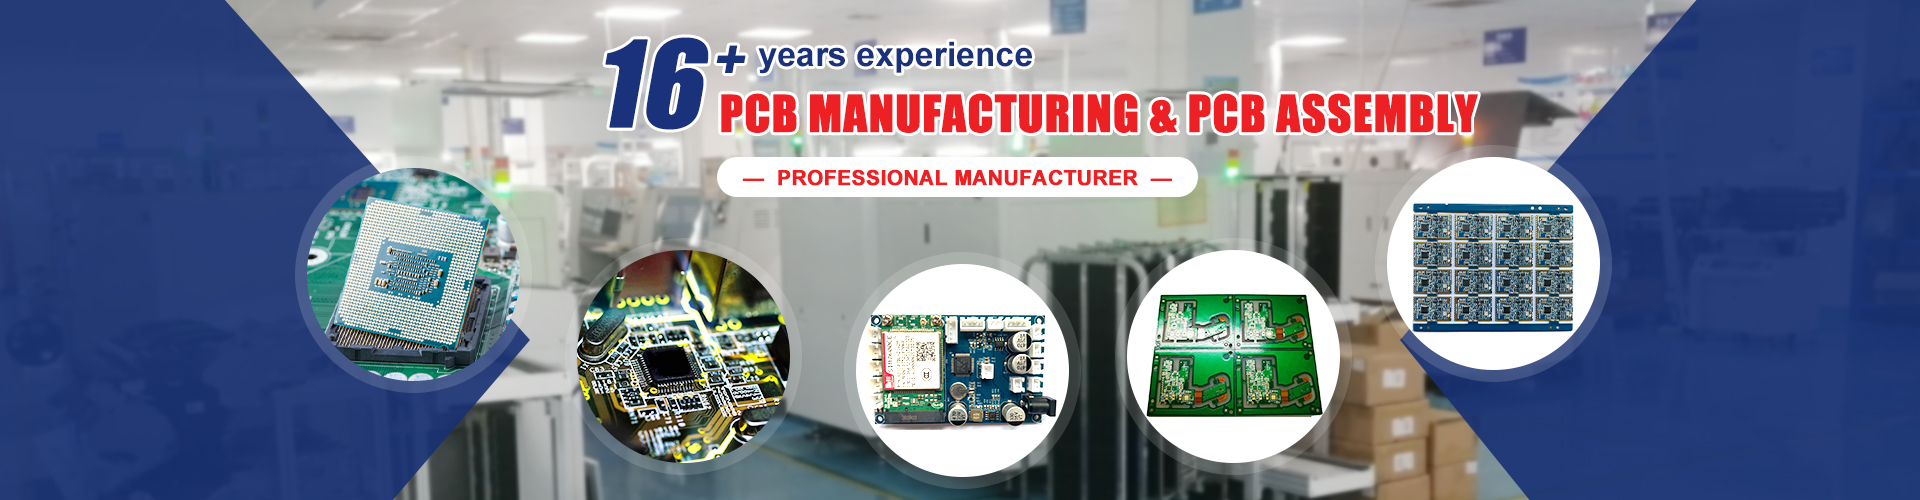 fabricate pcb manufacturing services